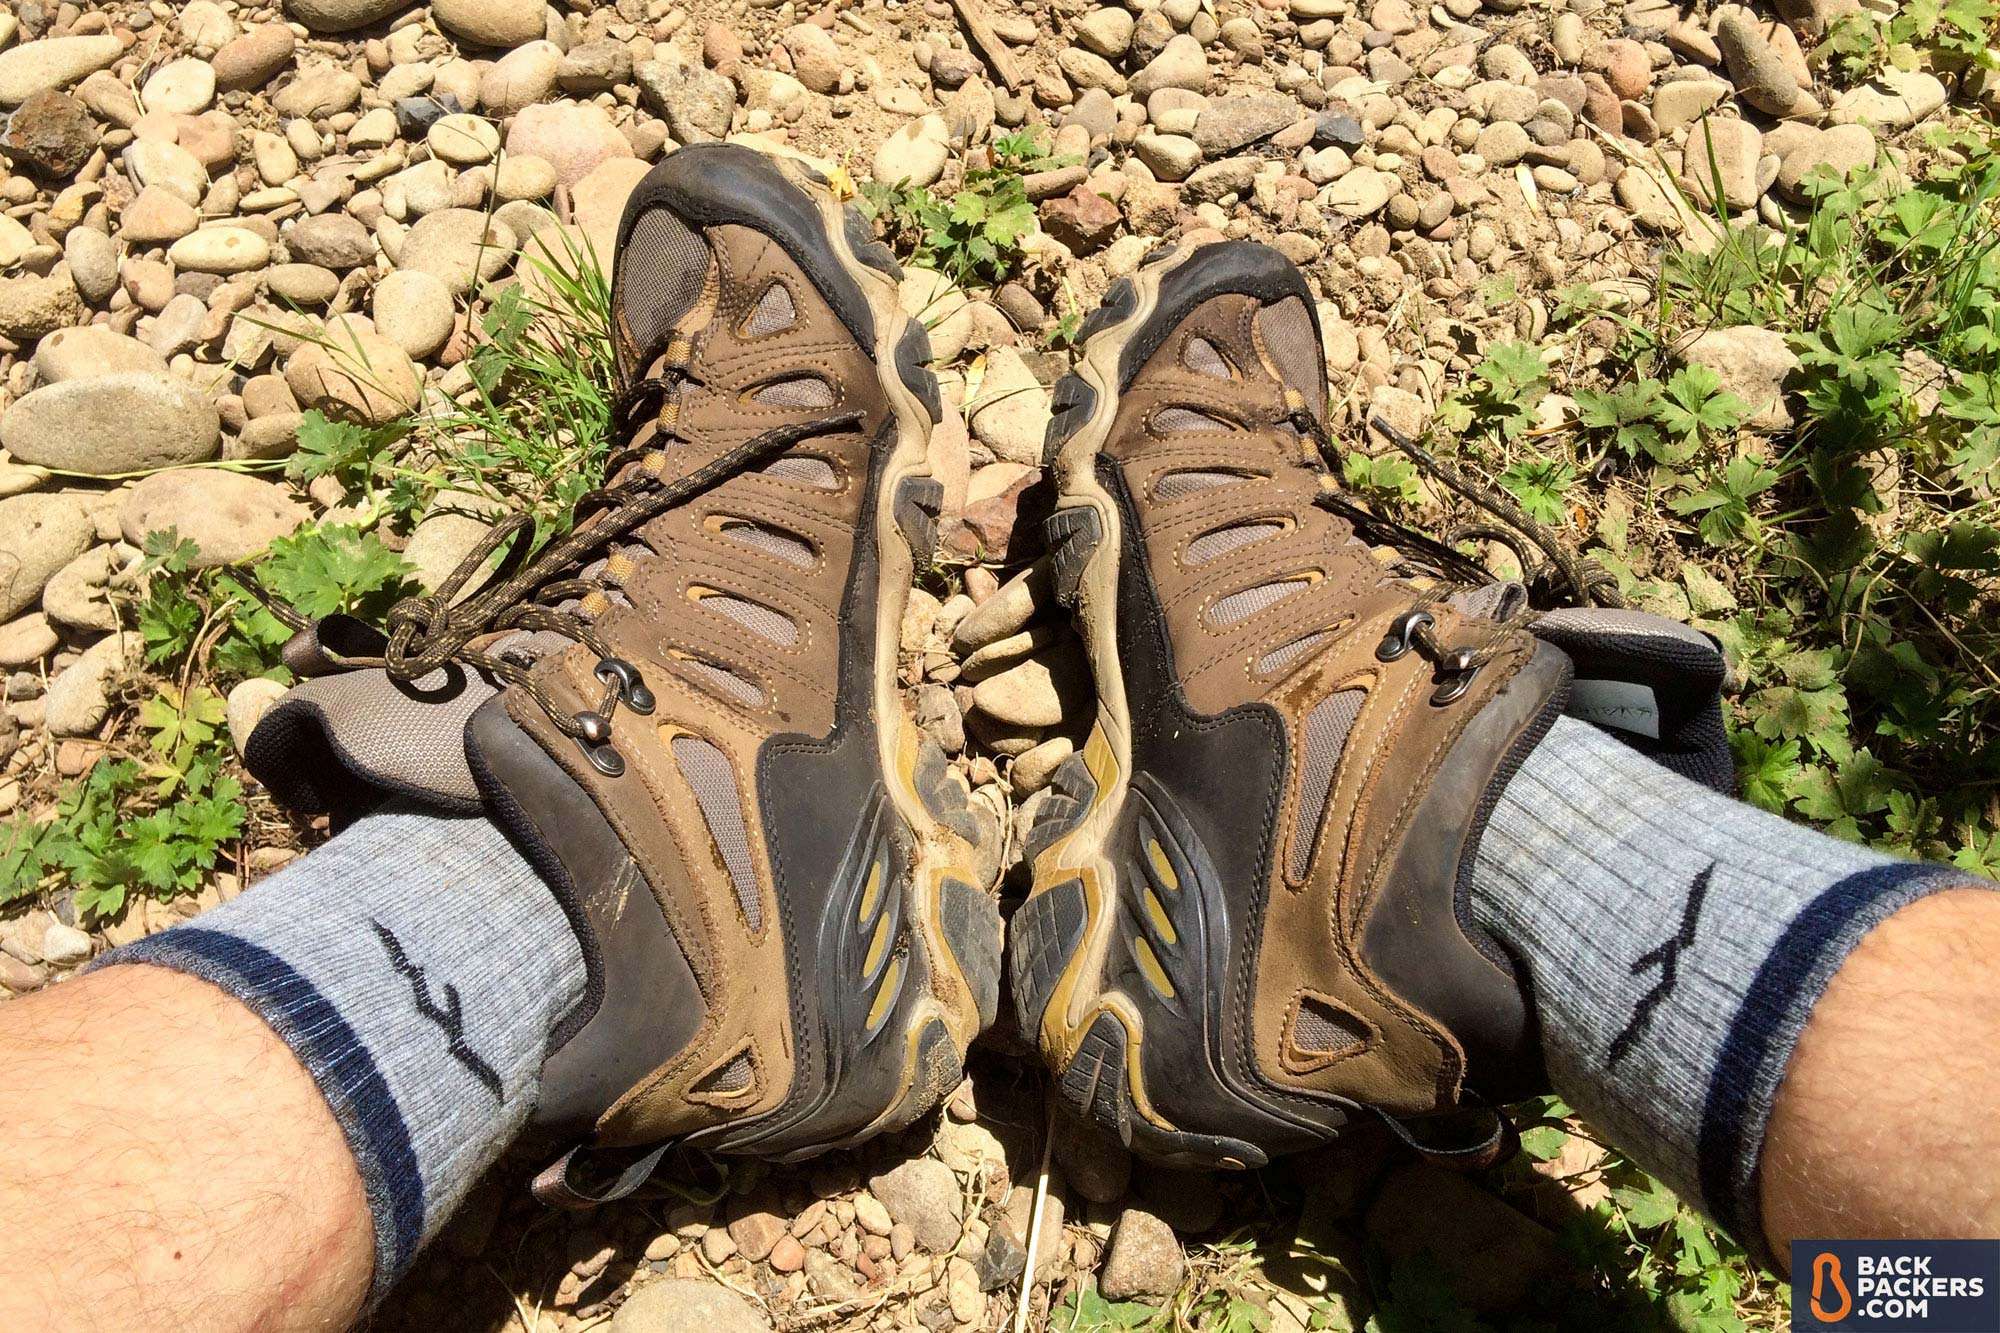 Oboz Sawtooth Mid Review | Hiking Boots 